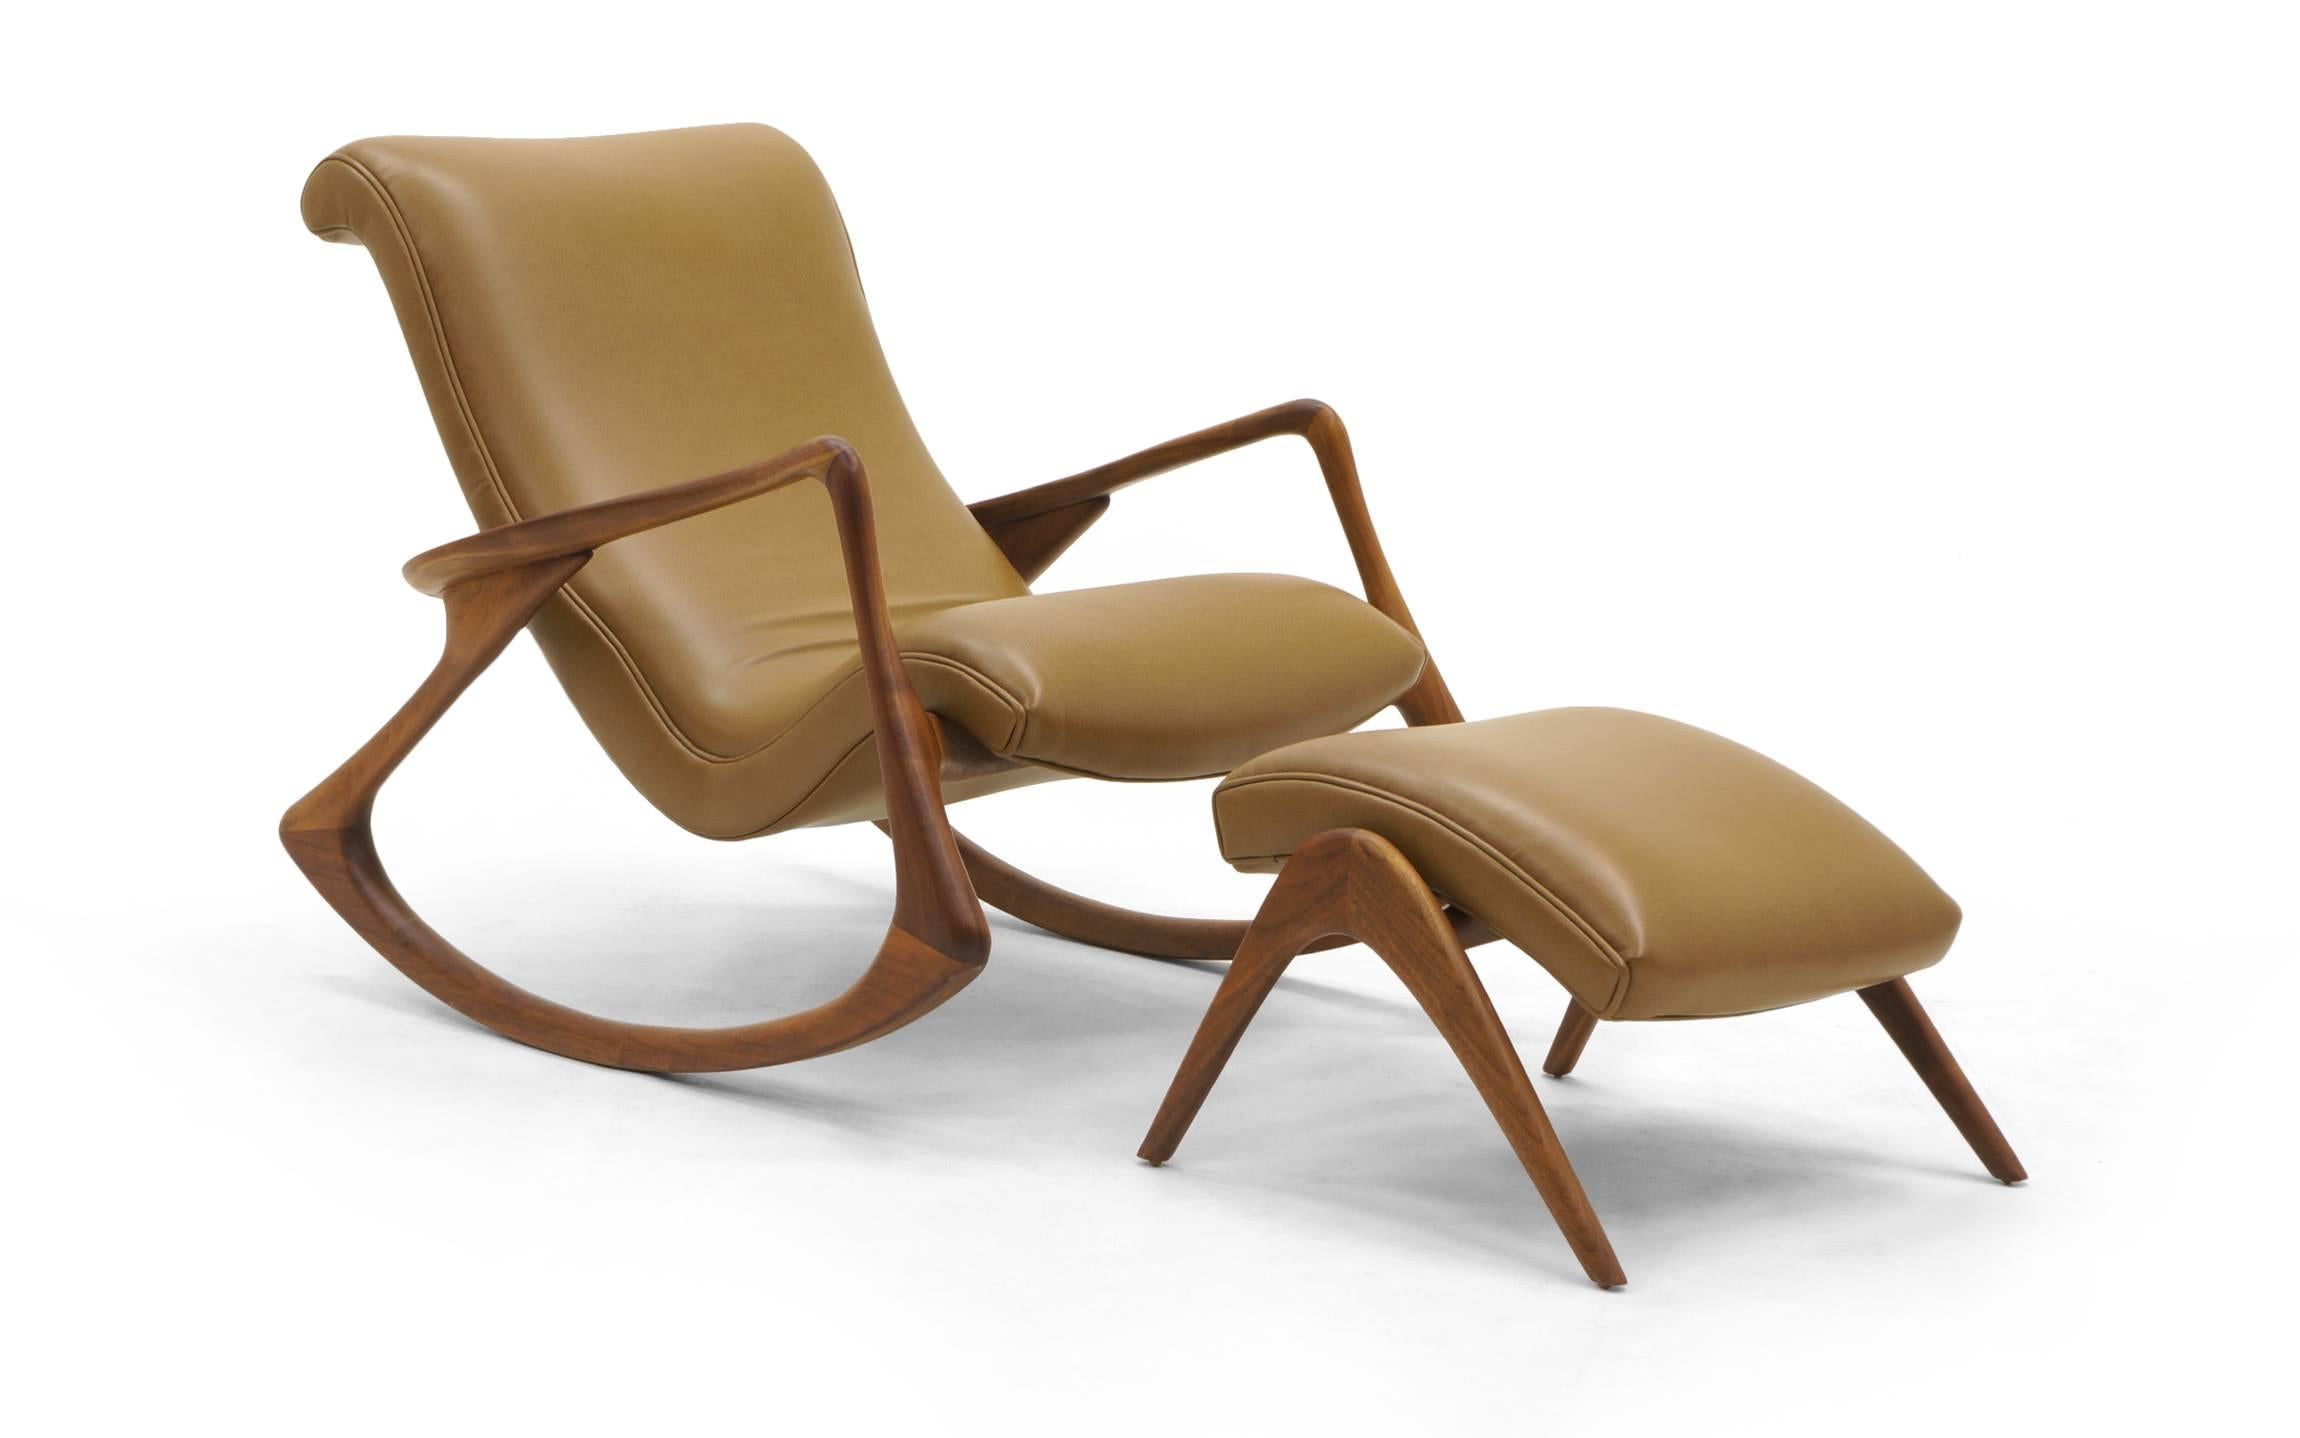 Vladimir Kagan manufactured this contour rocking chair and ottoman in an exclusive reissue with Ralph Pucci International. The upholstery was upgraded to holly hunt stingray leather. Both the chair and ottoman are in excellent condition. Signed with